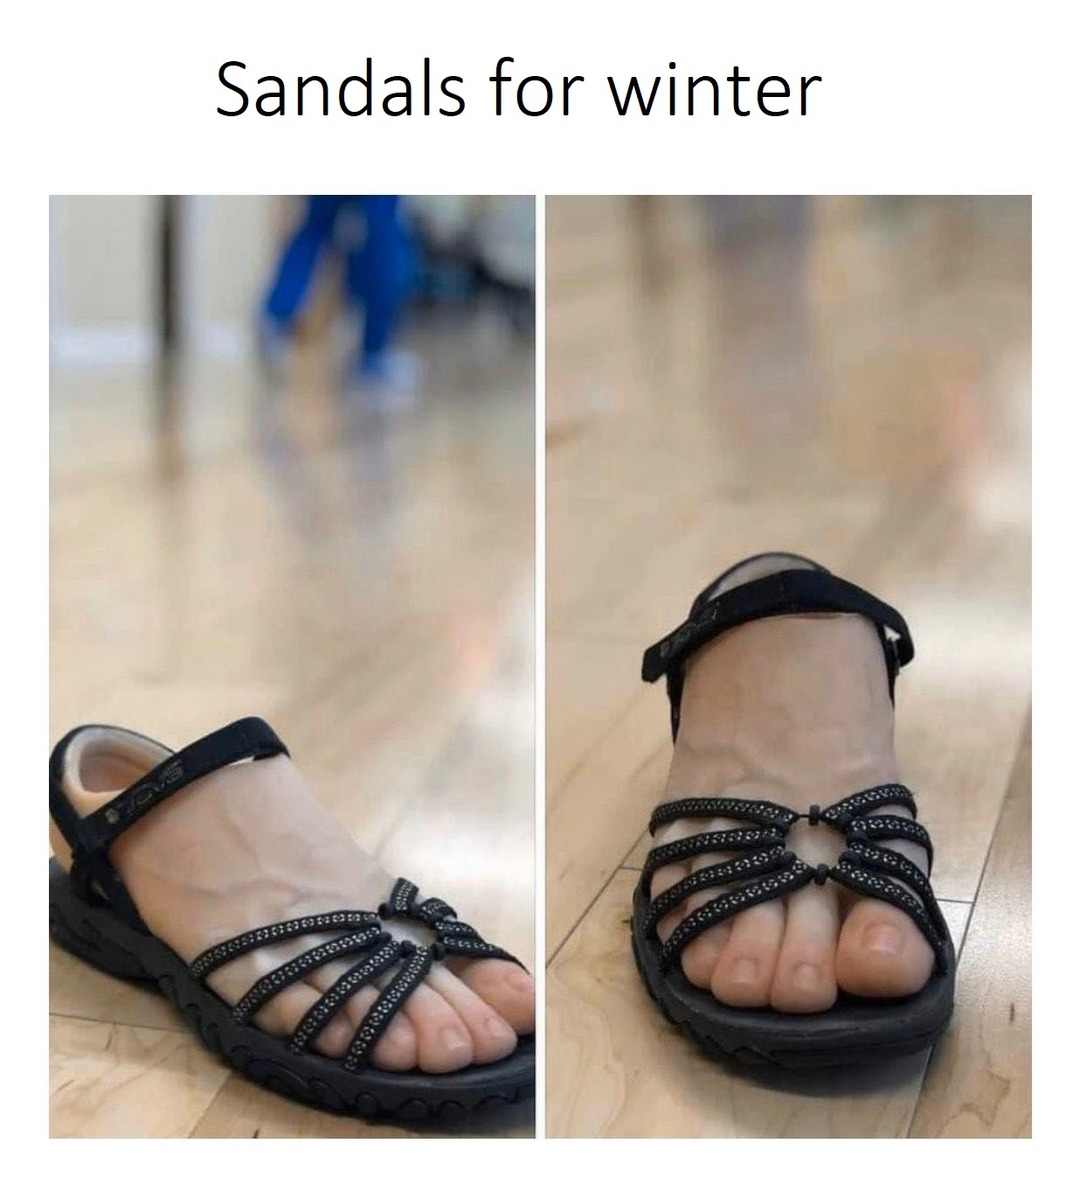 Now you can wear sandals on winter time - meme